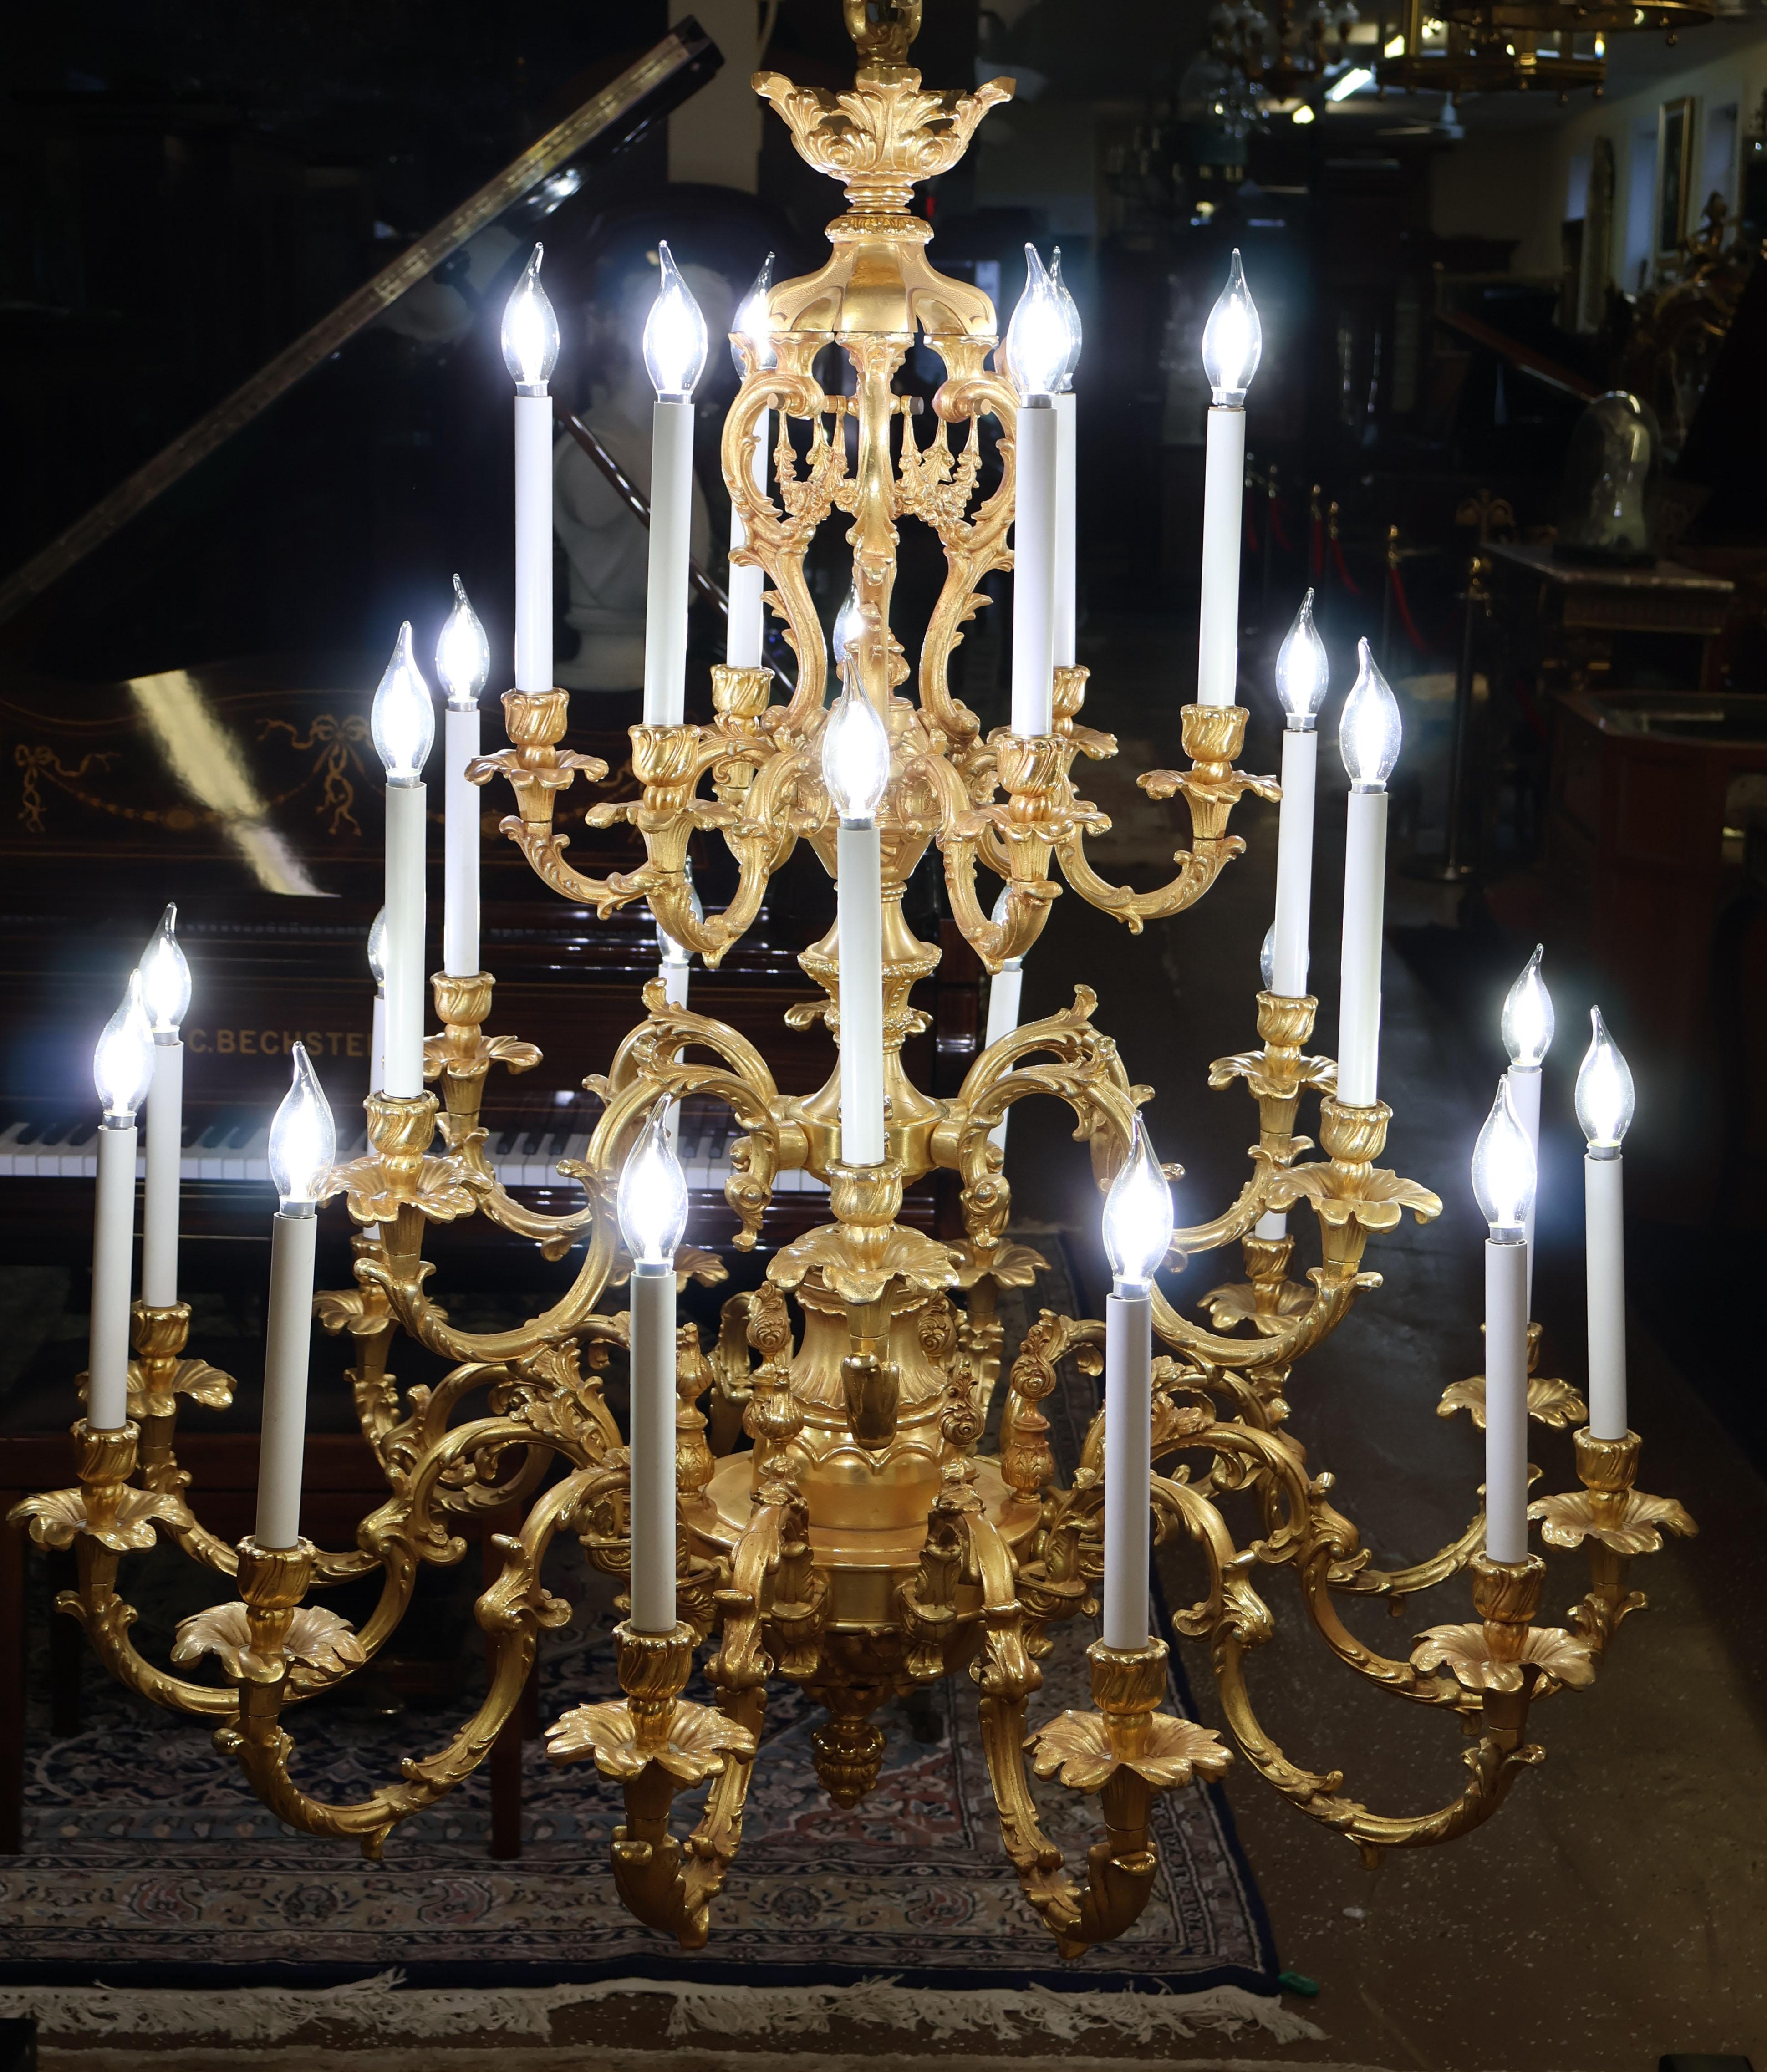 ​Monumental Italian Rococo Style 20 Light Bronze Gold Gilt Chandelier By FBAI

Dimensions : 42 X 42 X 42

This chandelier was made by FBAI in Italy in the rococo style and is superb quality! The bronze is finely cast and the gold dore is stunning!